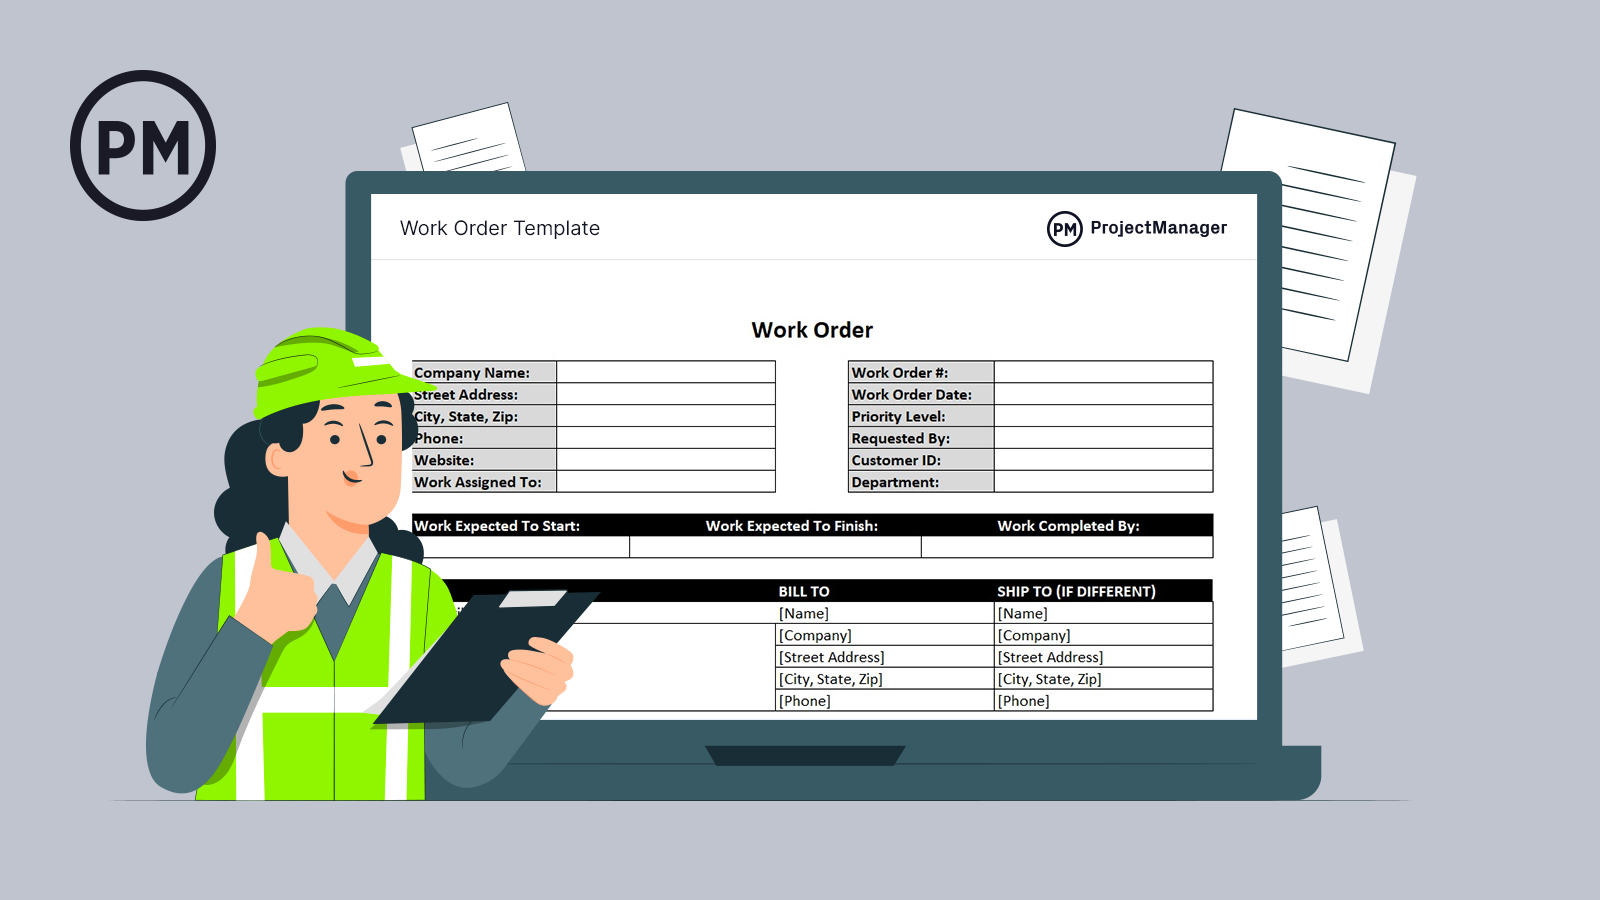 Work Order Template for Excel (Free Download) - ProjectManager